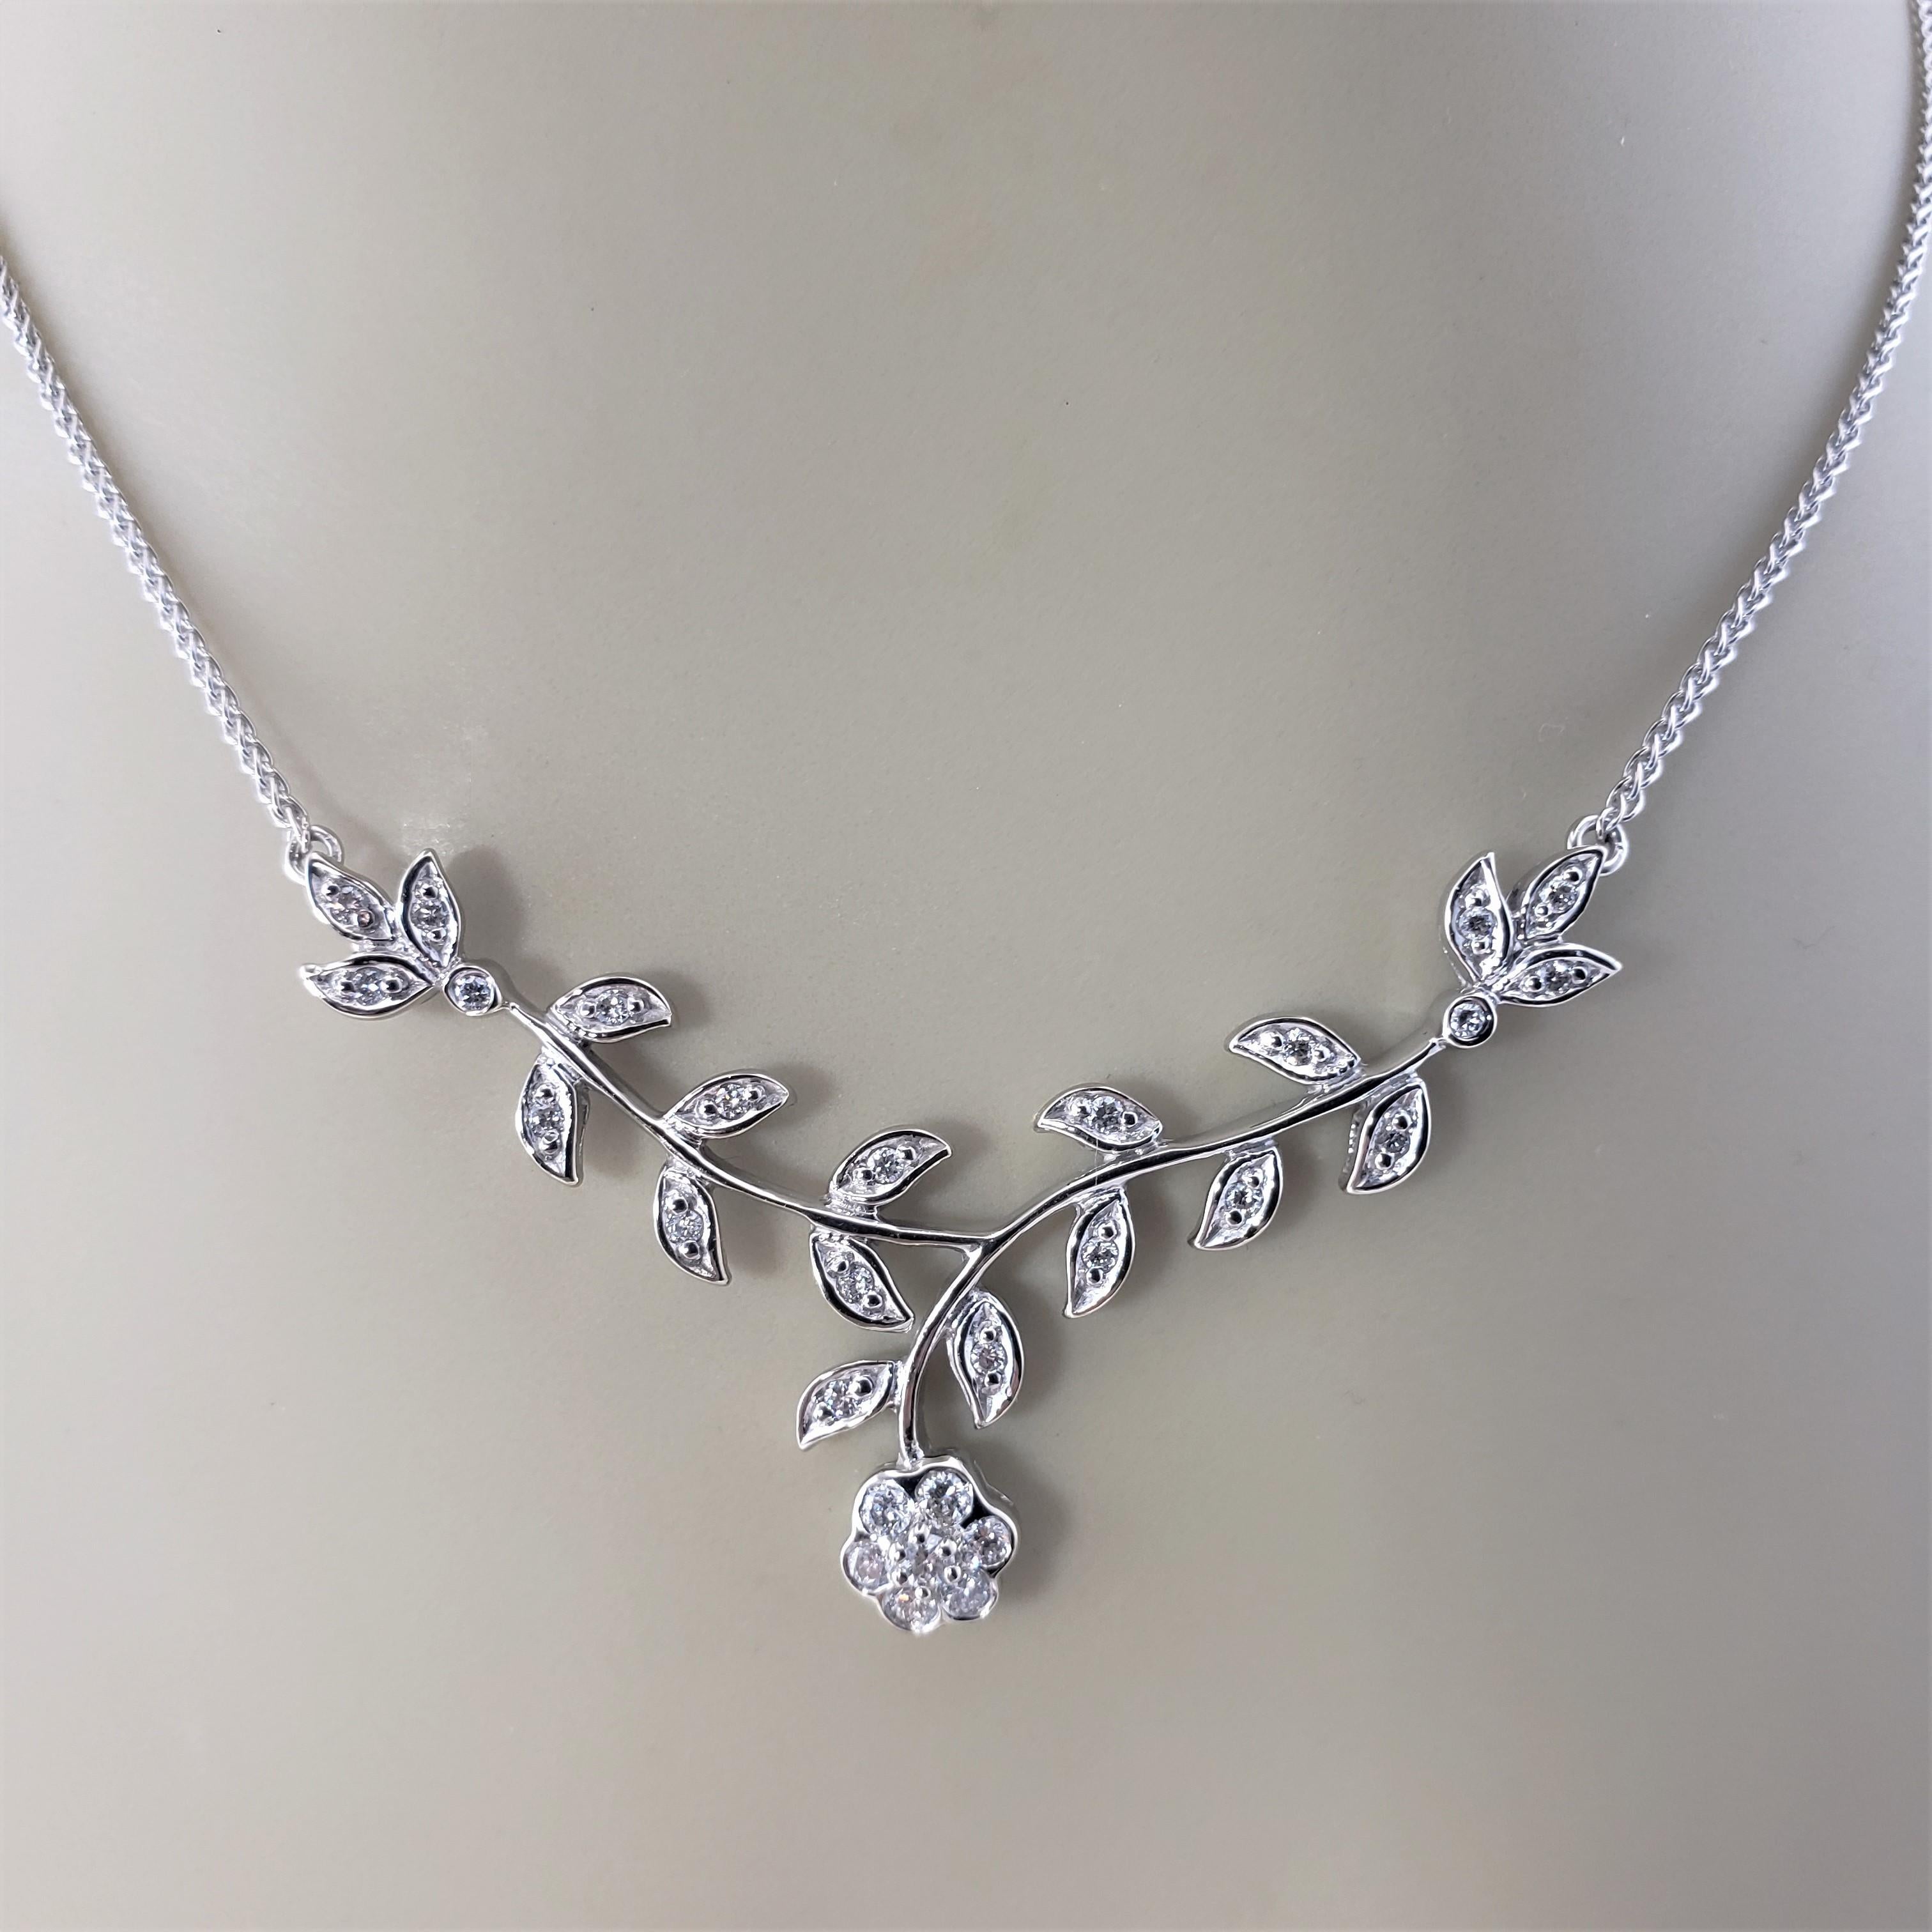 14 Karat White Gold and Diamond Floral Necklace For Sale 2